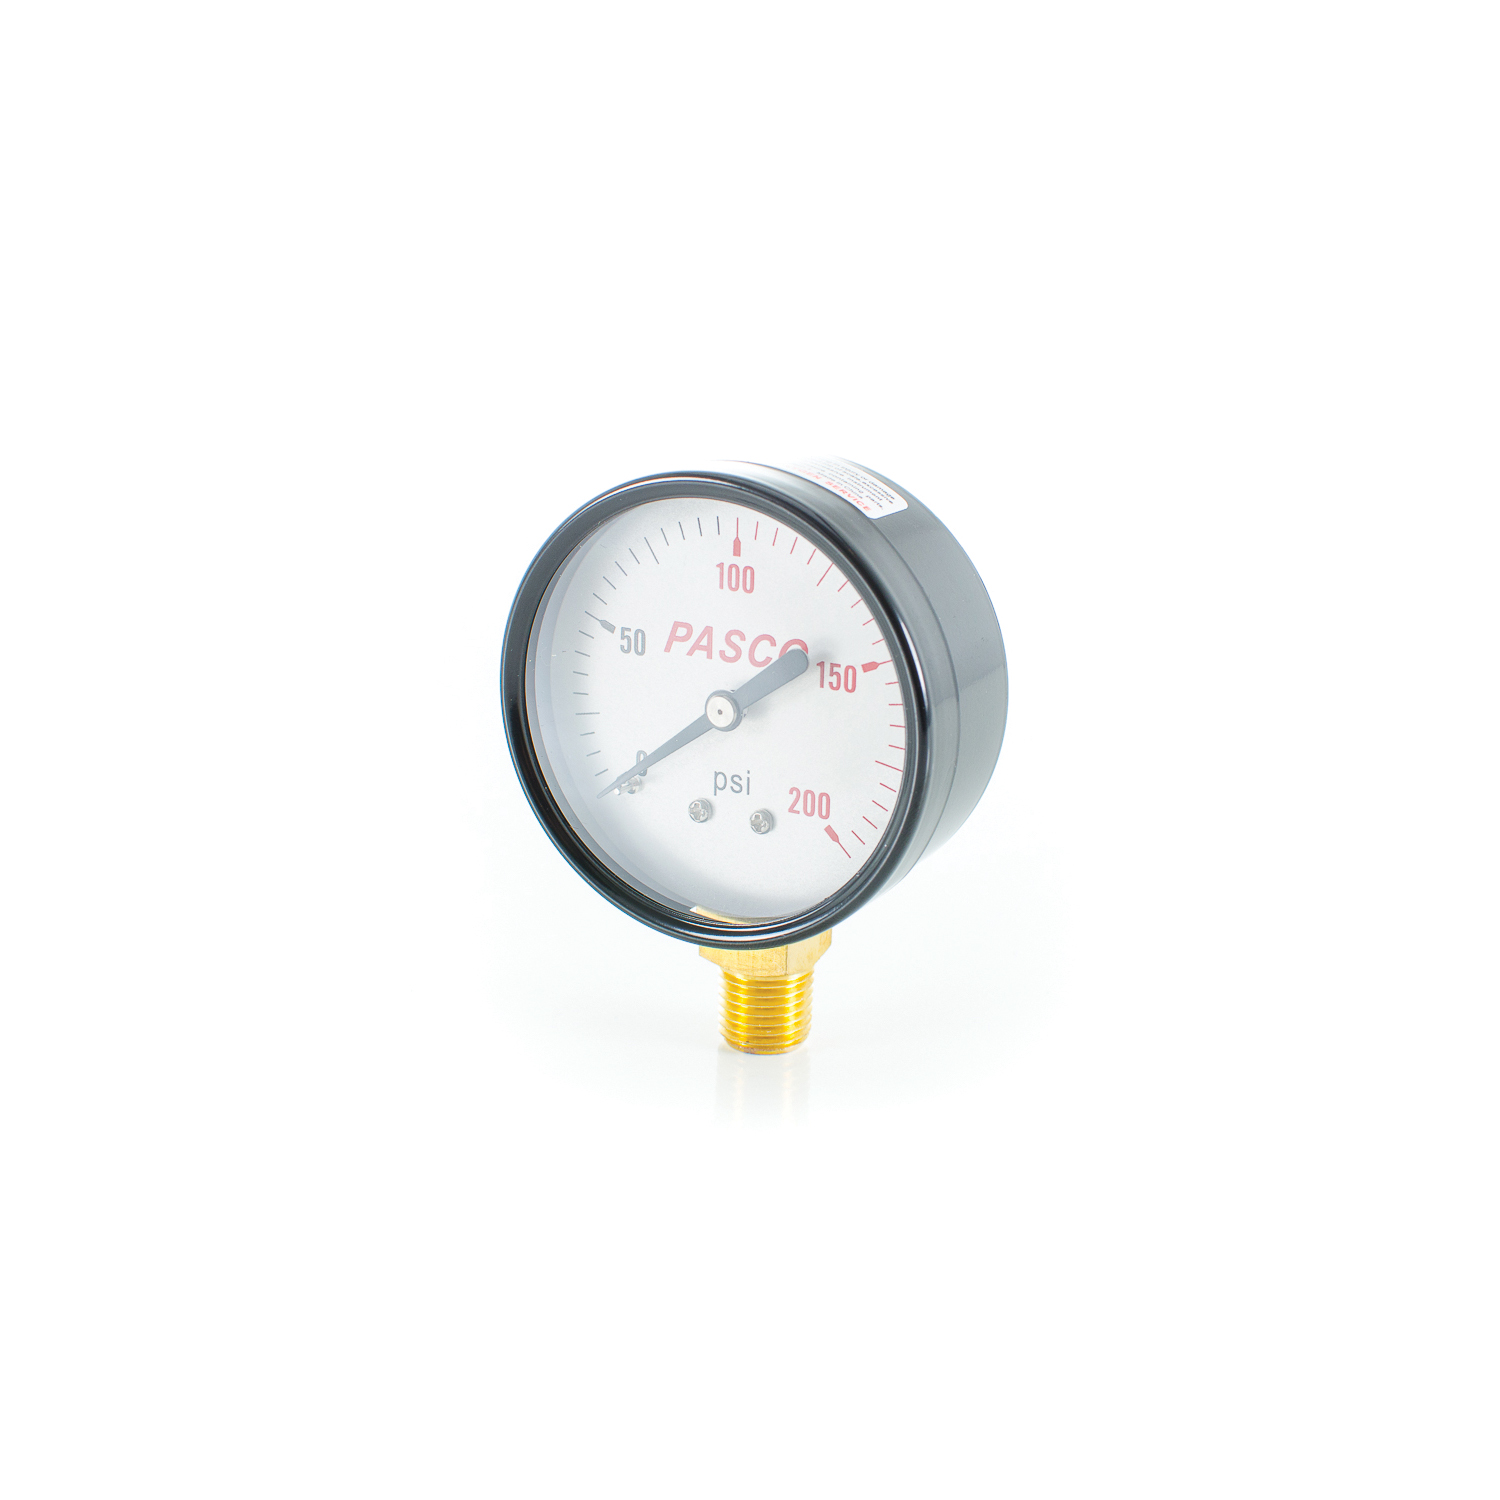 PASCO 1743 Pressure Gauge, 200 psi, 1/4 in MNPT Connection, 2-1/2 in Dial